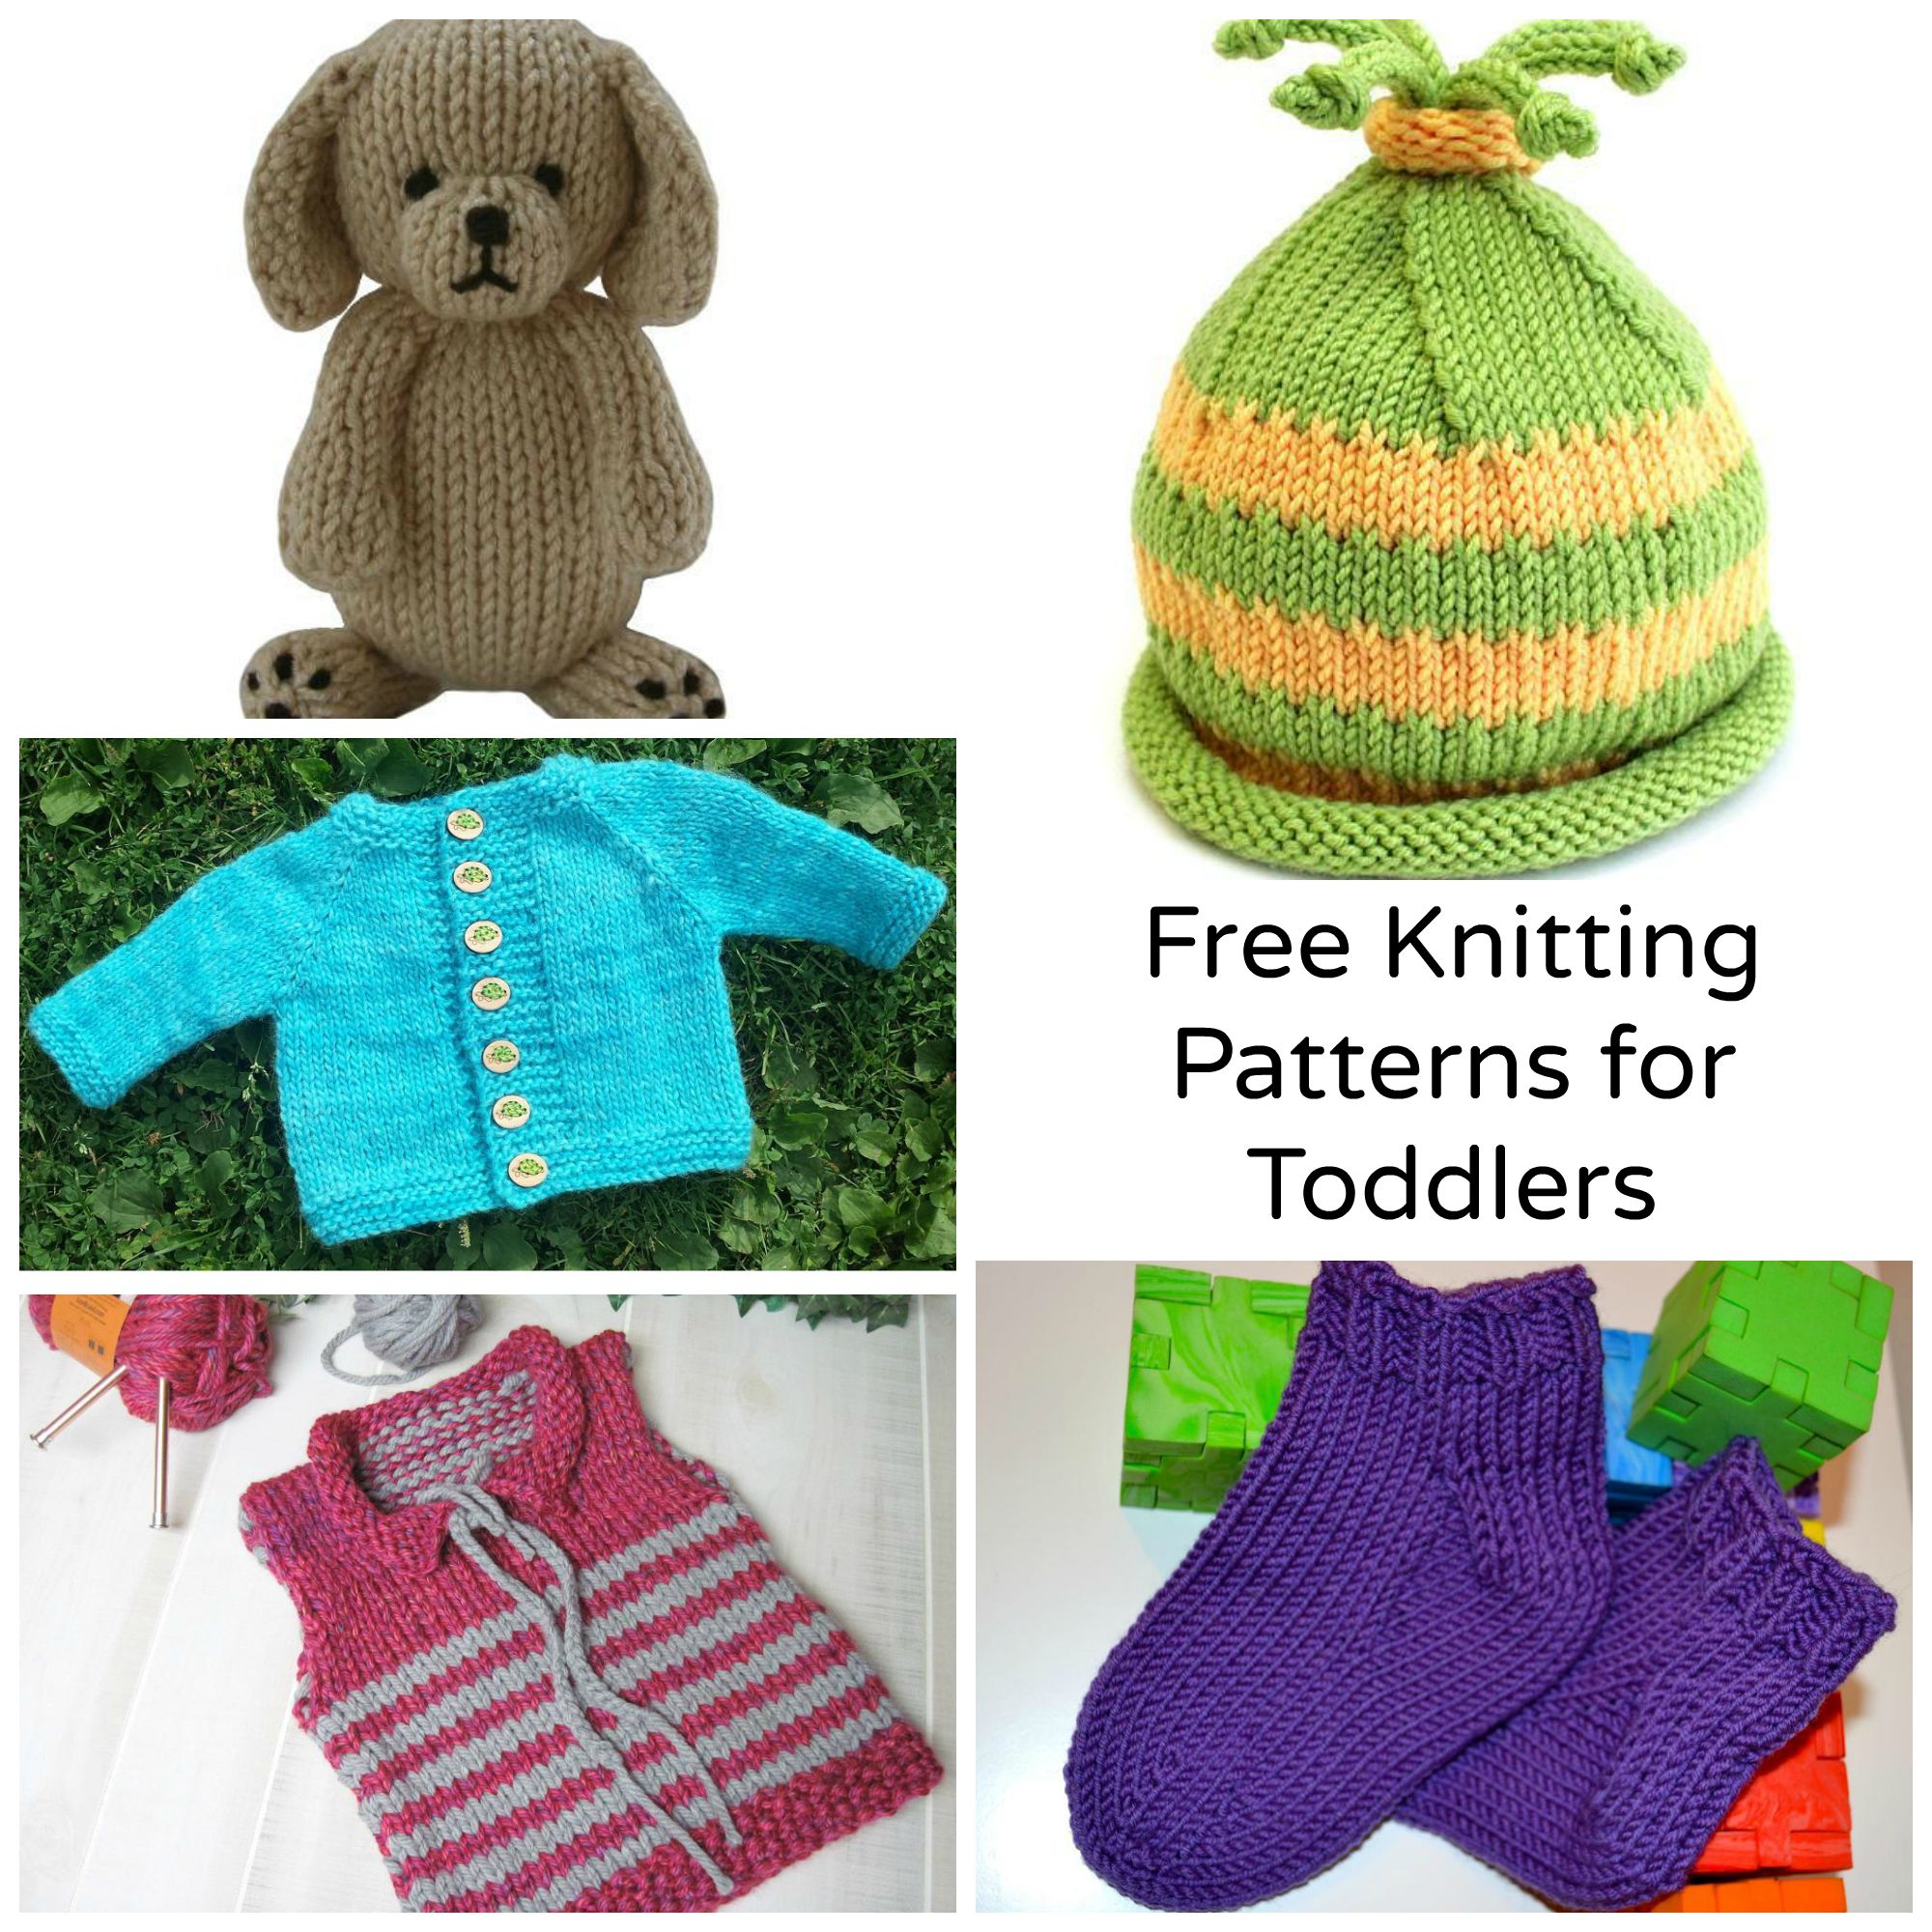 Free Knitting Patterns For Boys 7 Sweet Free Knitting Patterns For Toddlers Craftsy